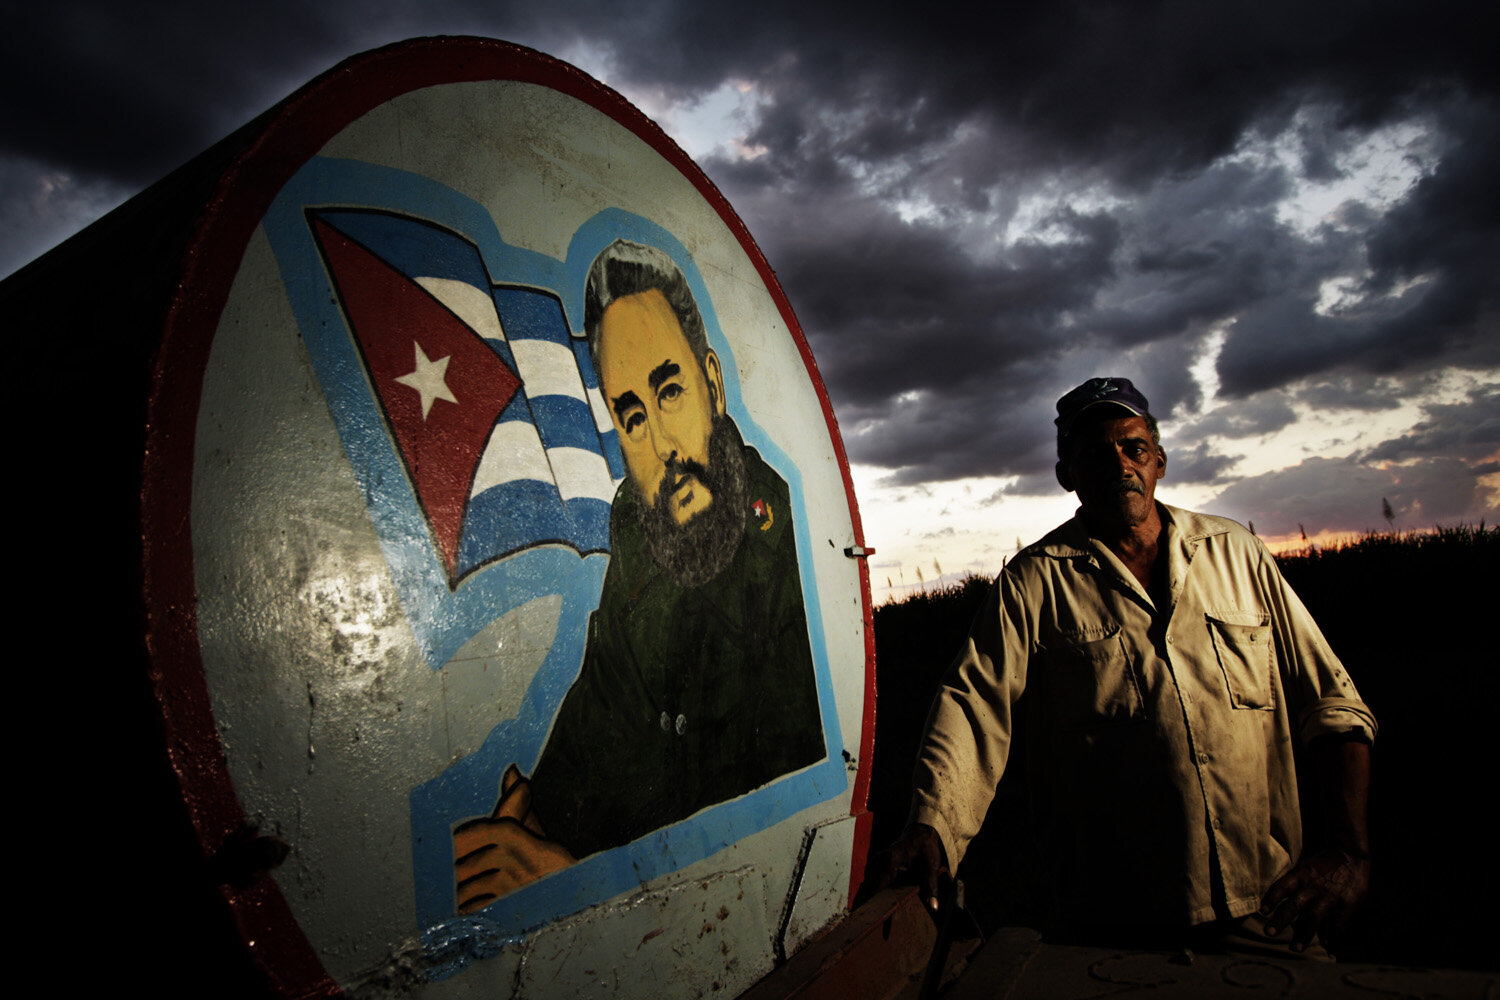  Osmel, 60, welder, poses for a portrait next to a water tank that bears an image of Cuba´s Revolution leader Fidel Castro. Osmel has been working for 35  years in the sugarcane industry.  